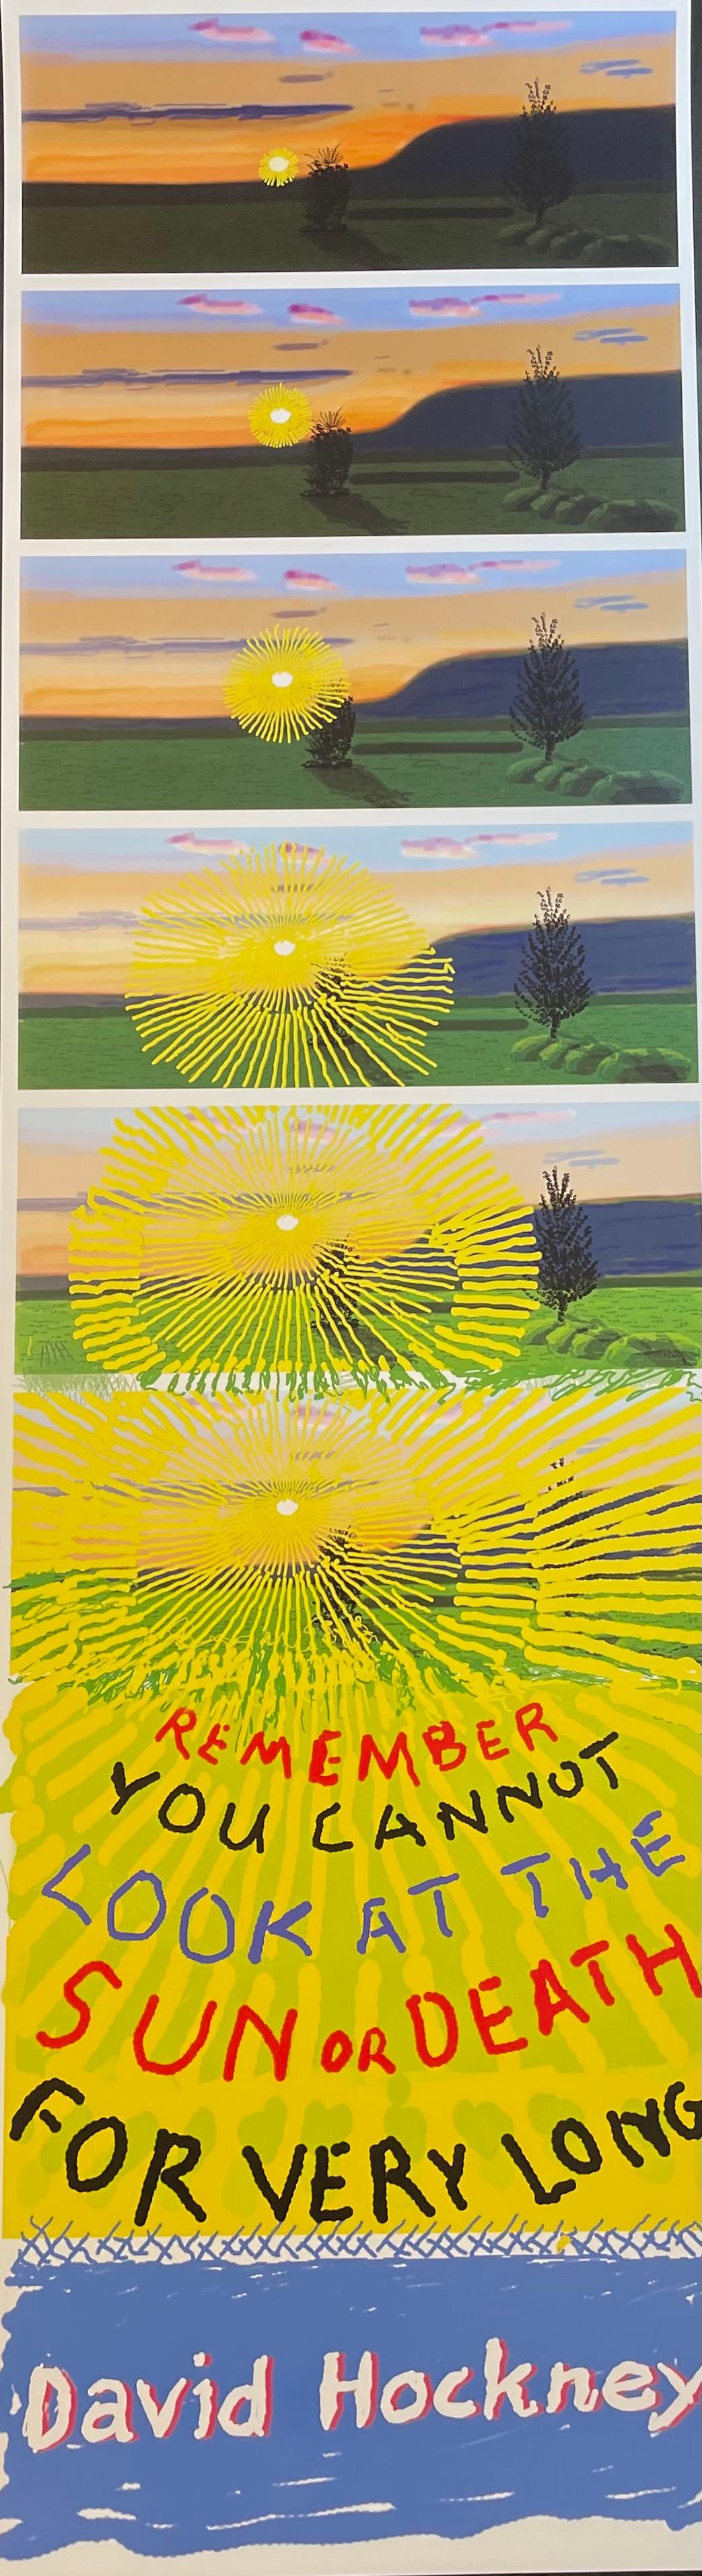 David Hockney Remember You Cannot Look At The Sun Or Death For Very Long COA 6